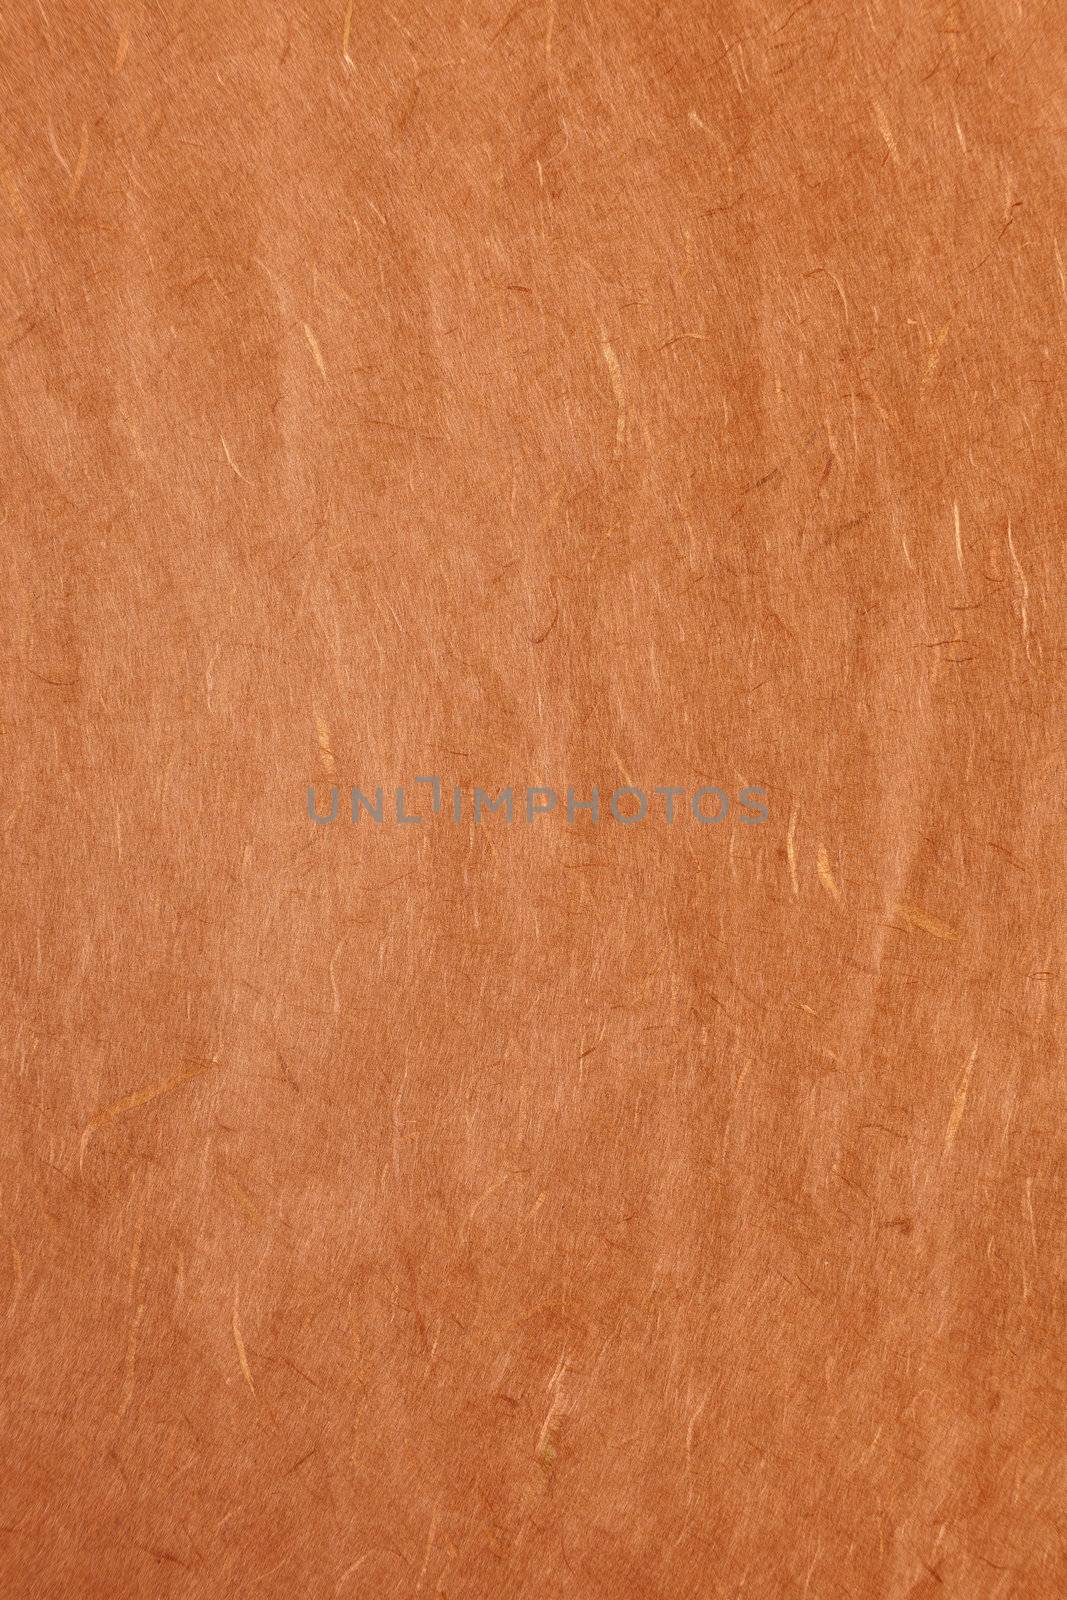 Fine brown mulberry paper texture for background